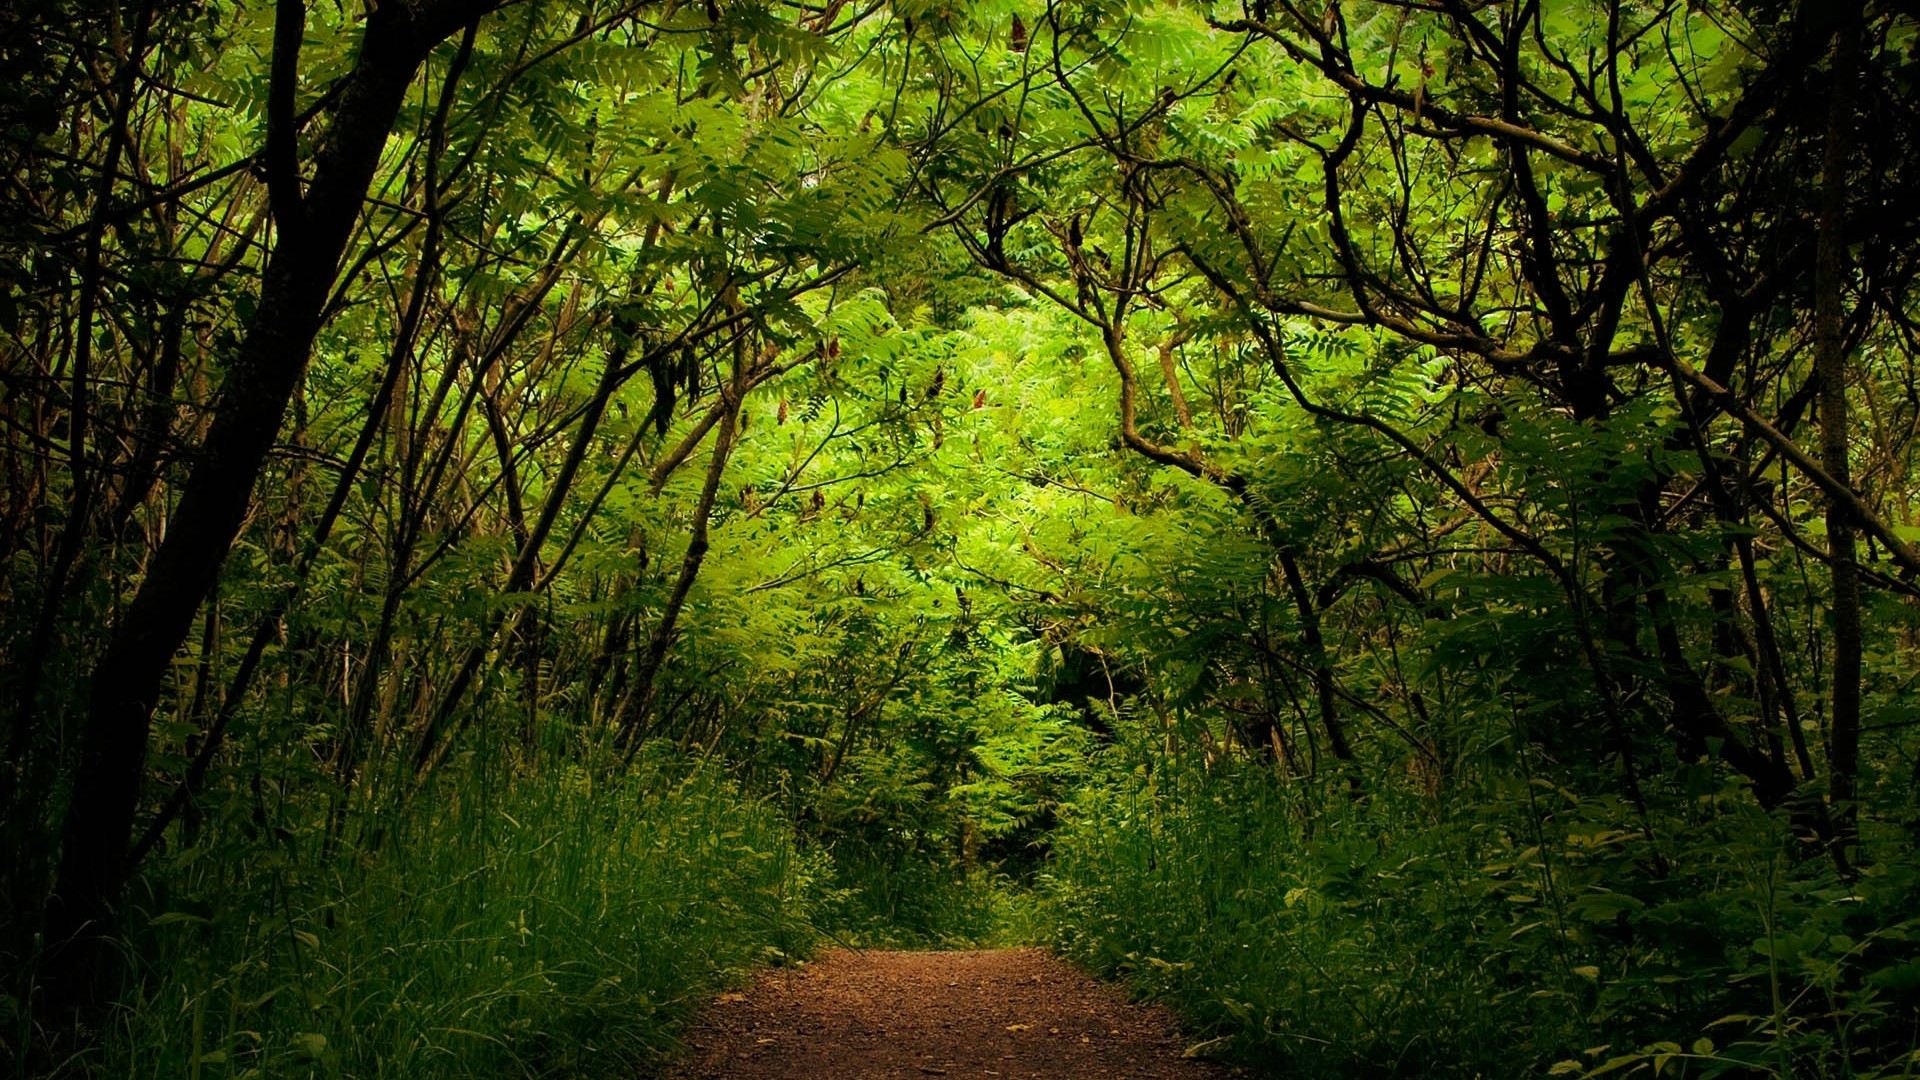 Wallpaper 1080p Forest 76 Images